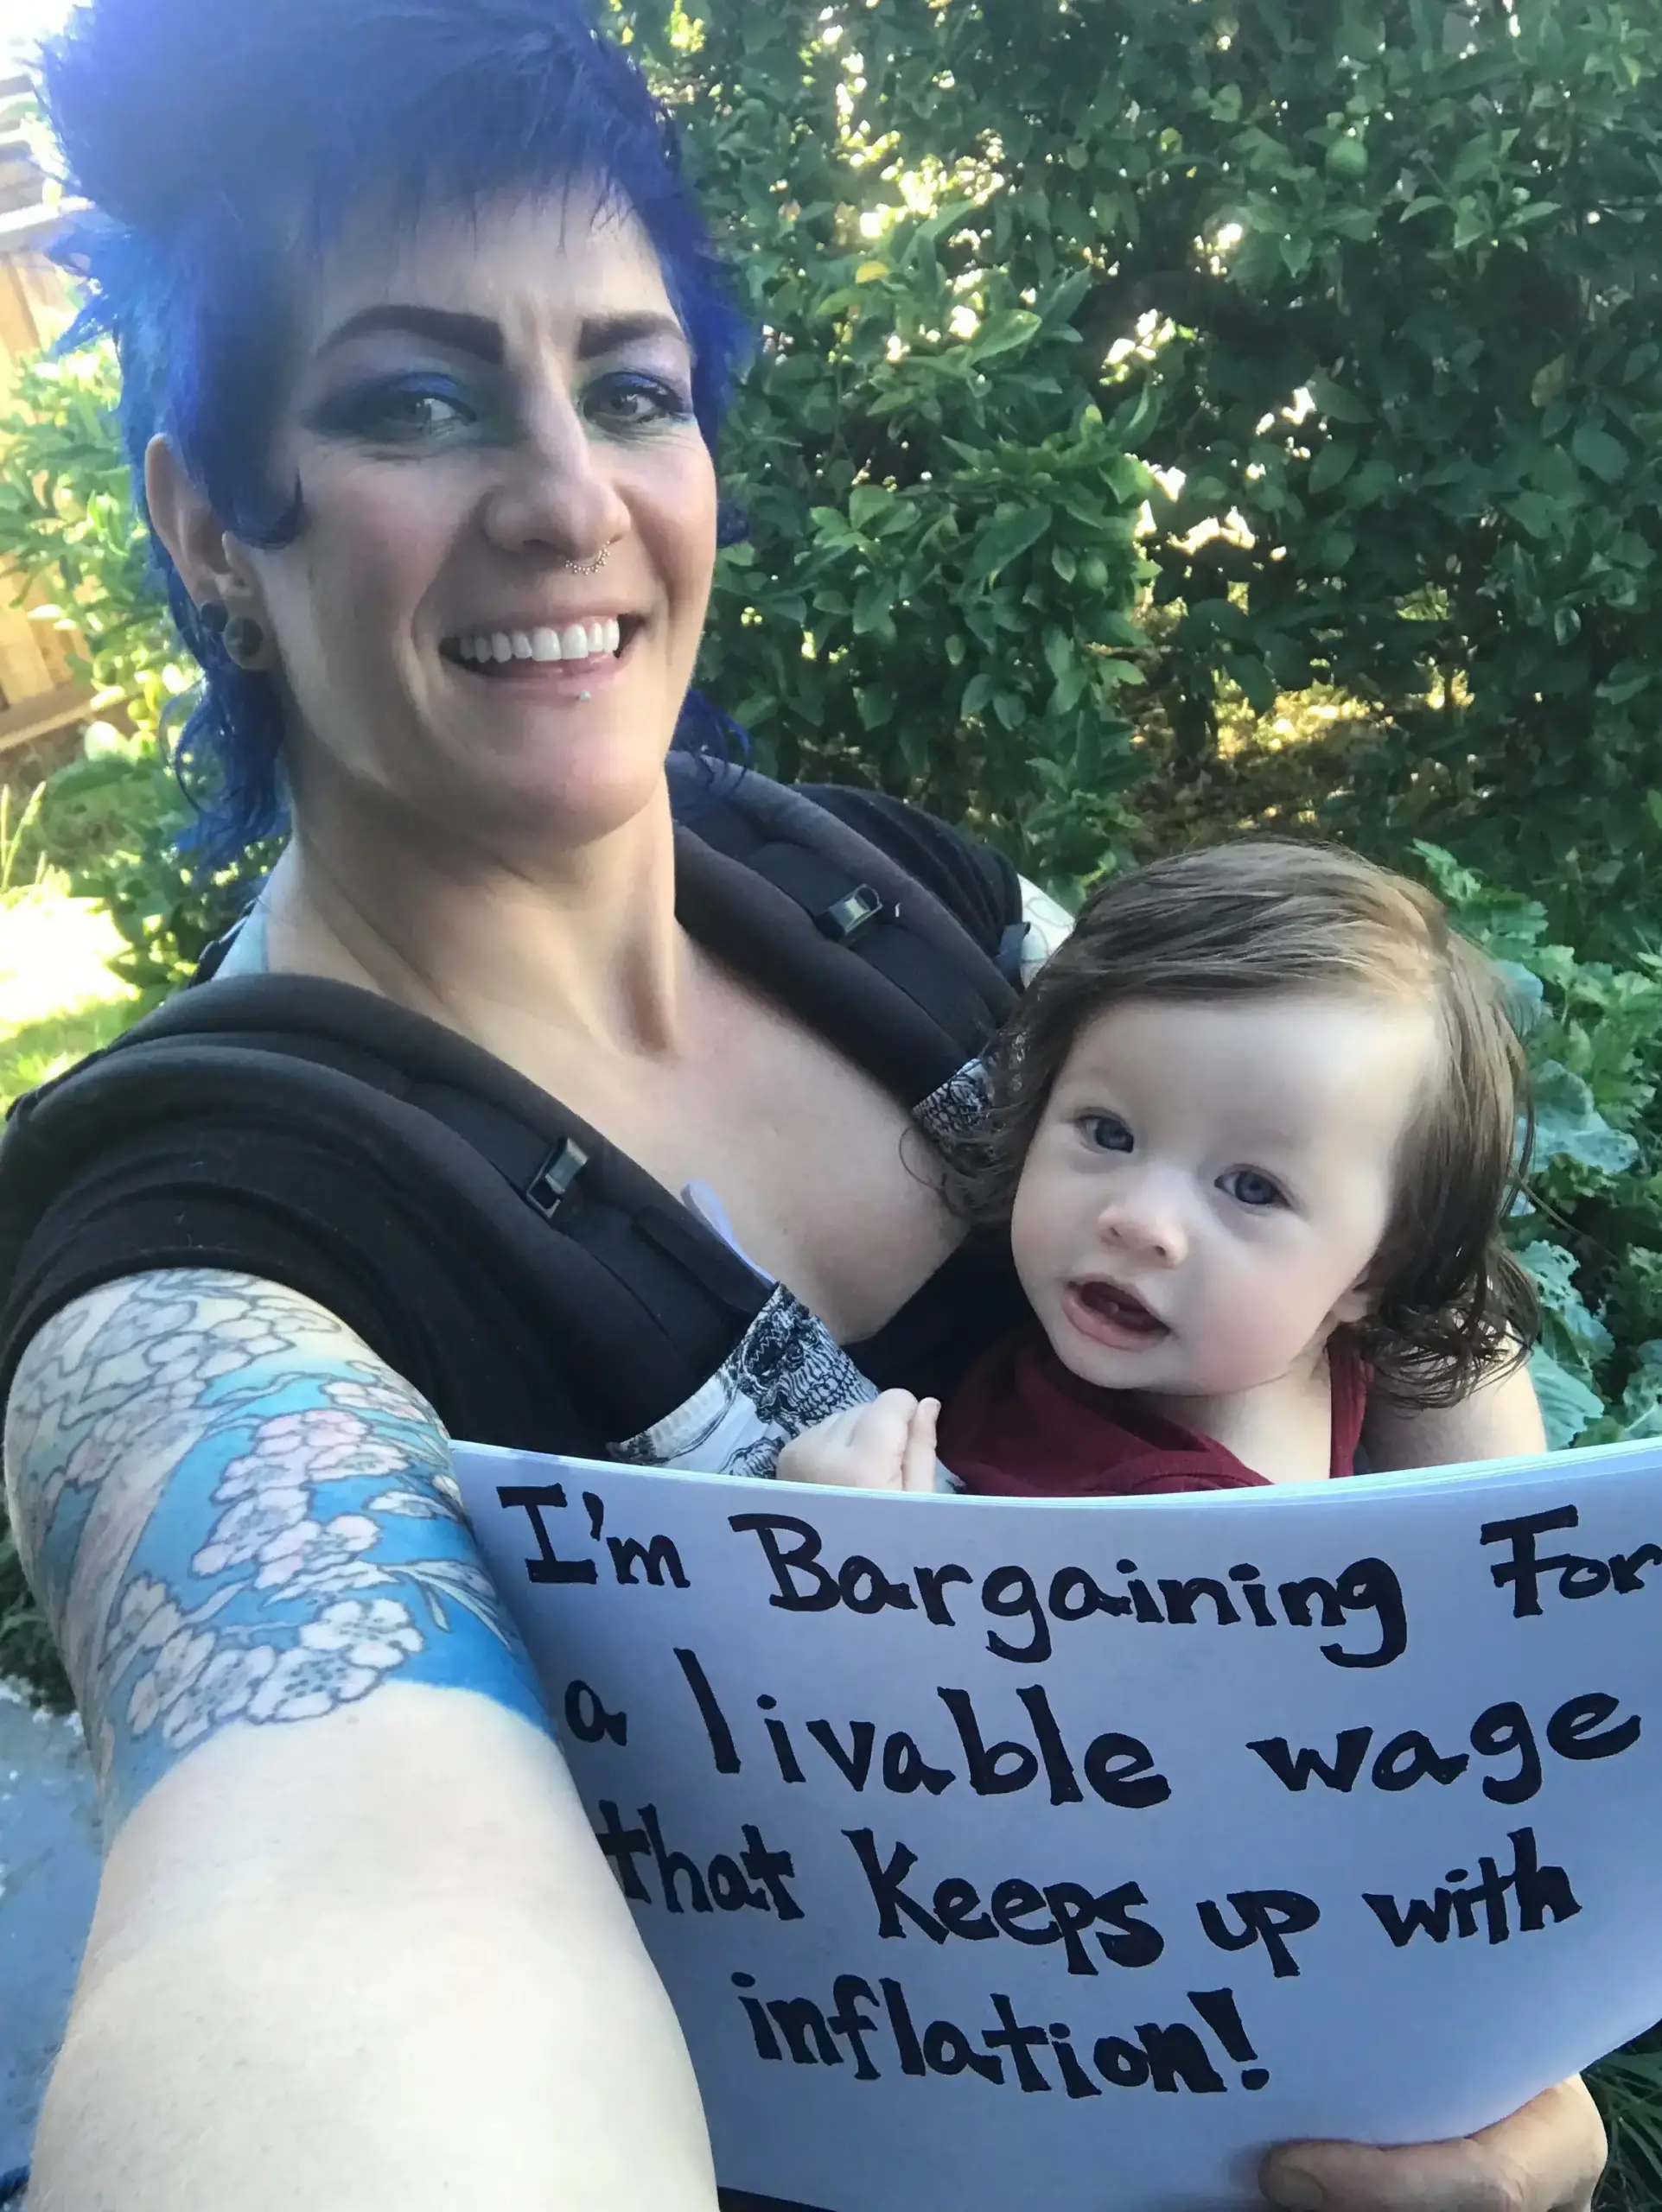 CFA member Anne Luna-Gordinier holds her baby and a sign saying "I'm bargaining for a livable wage that keeps pace with inflation!"